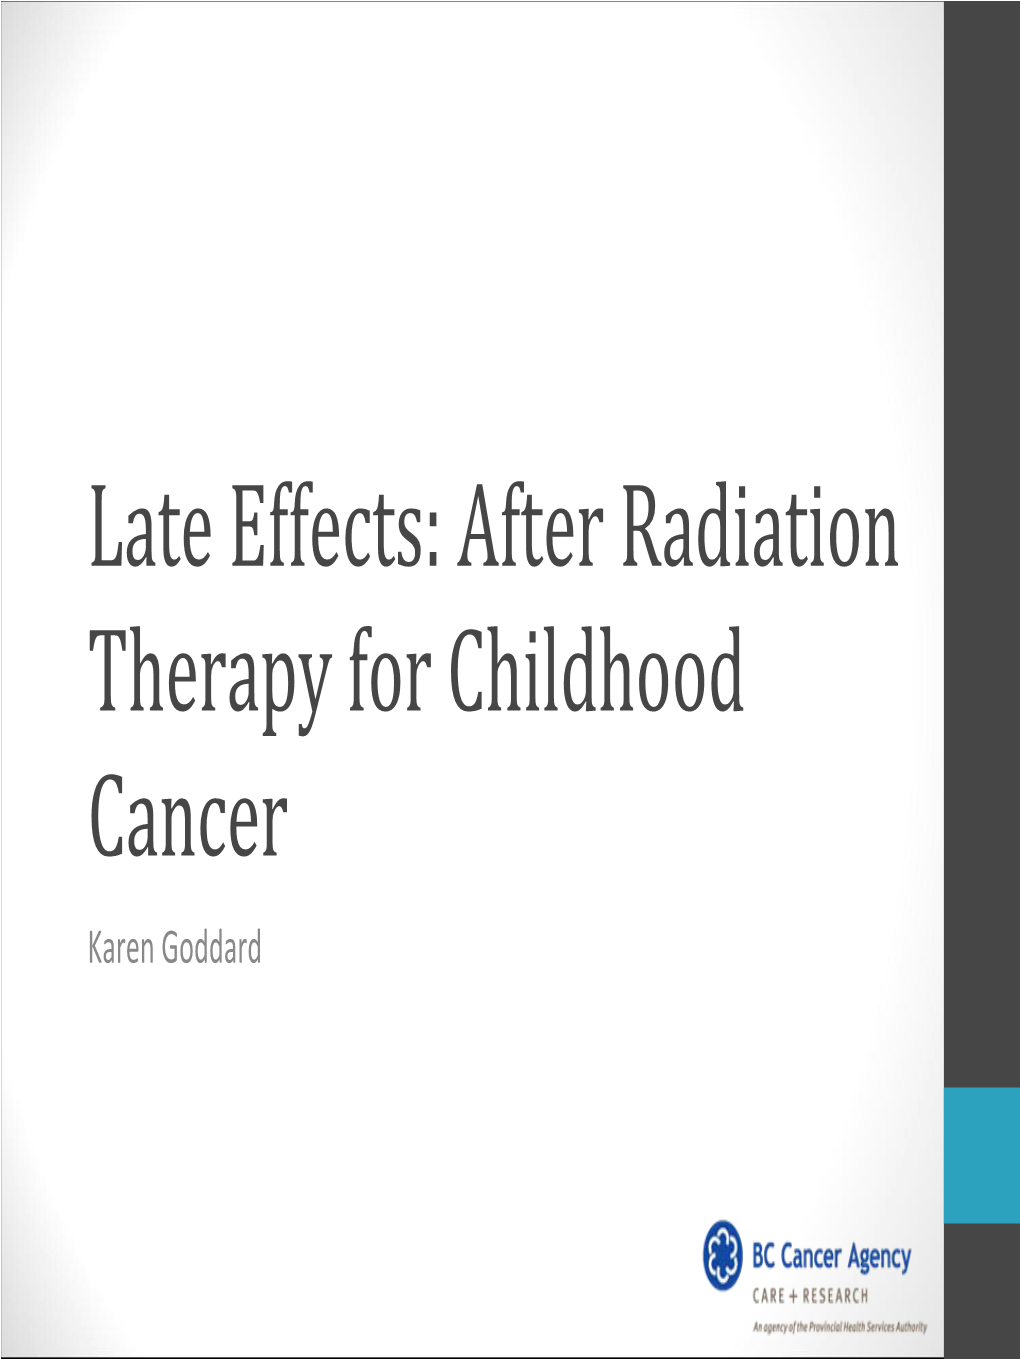 Survivors of Childhood Cancer: Late Effects